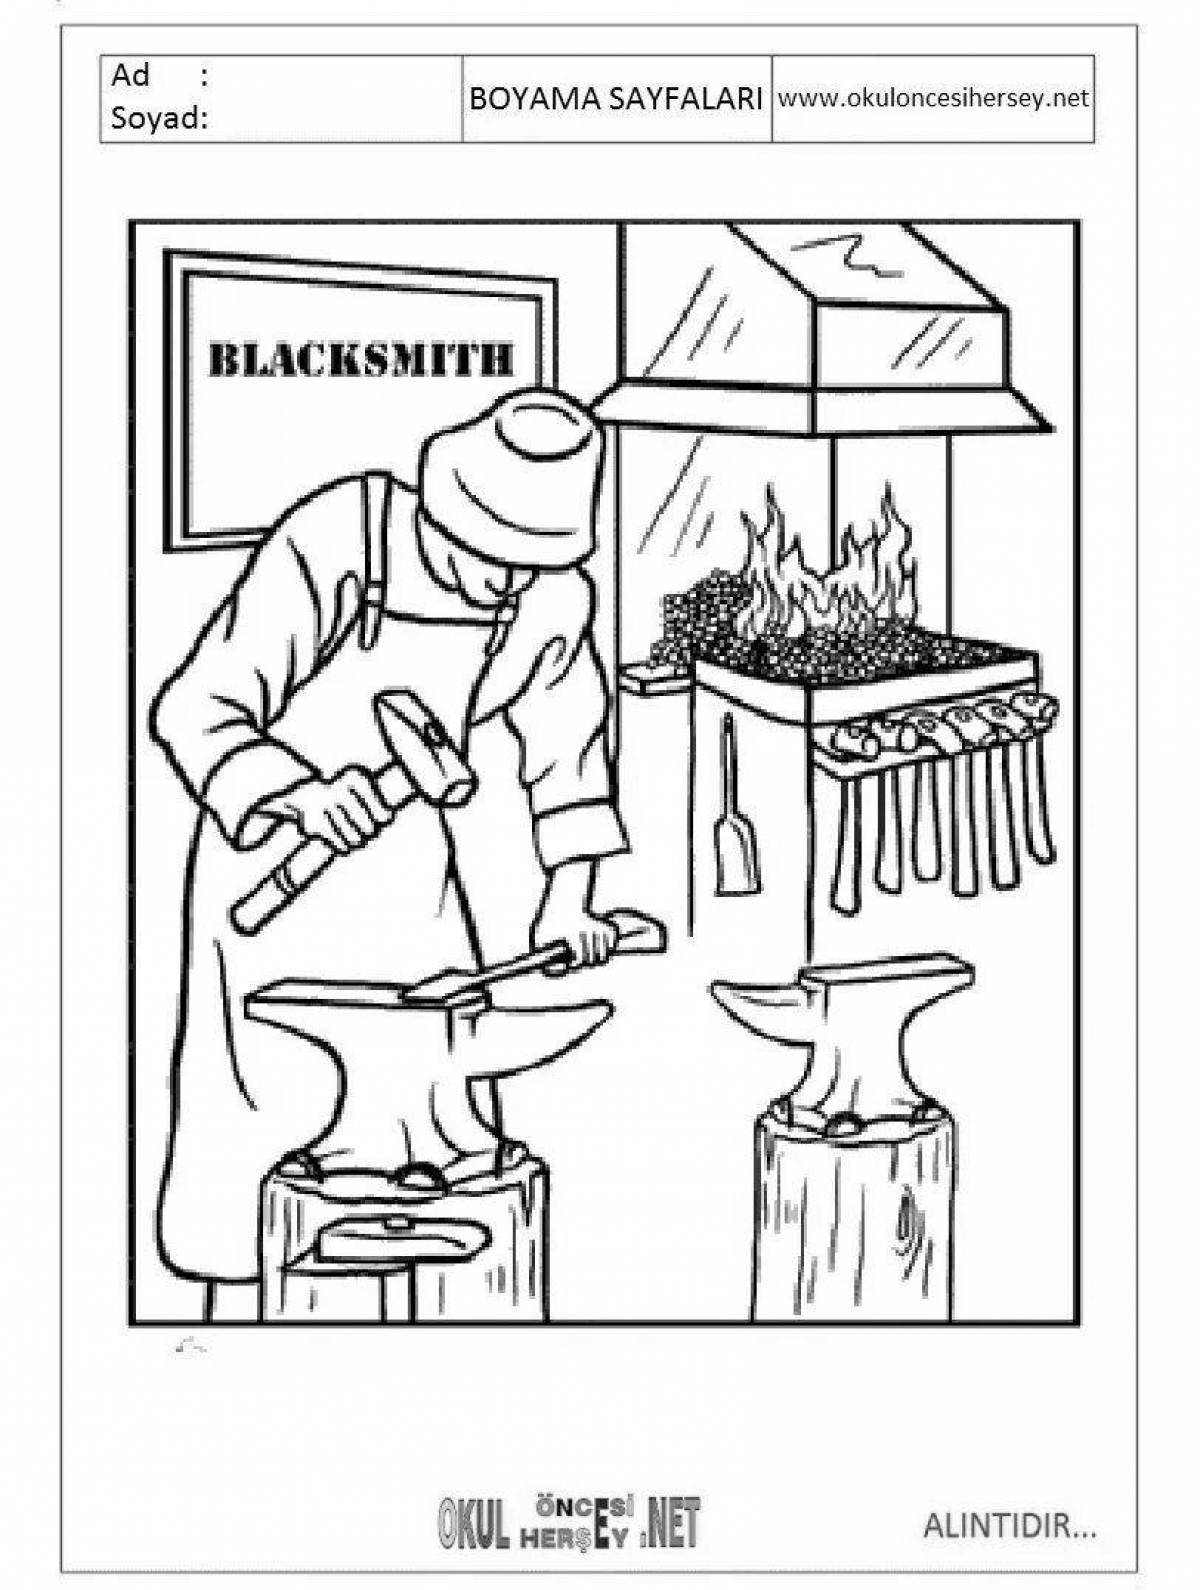 Colorful blacksmith coloring page